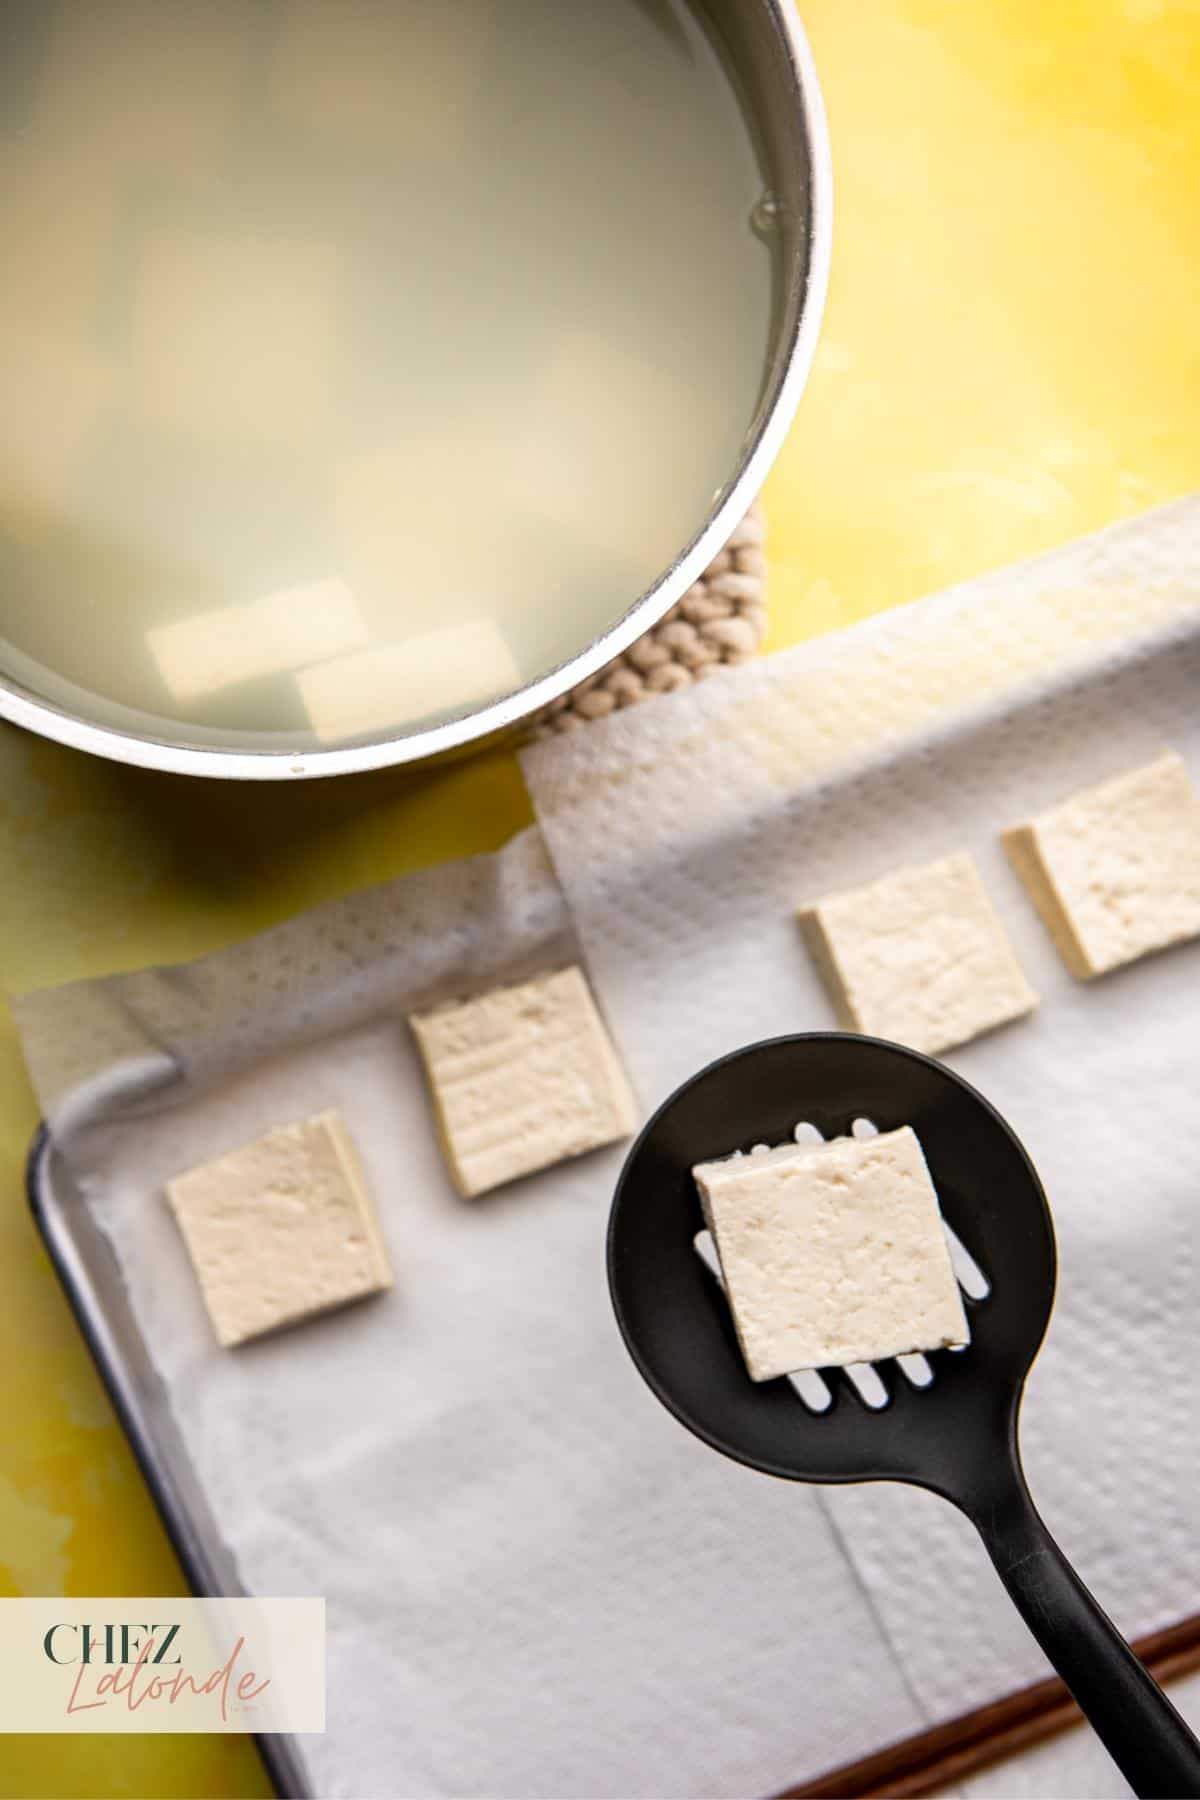 After cooking the tofu for 5 minutes, use a ladle to scoop out cooked tofu and place them on a cooking tray that lined with paper towels.